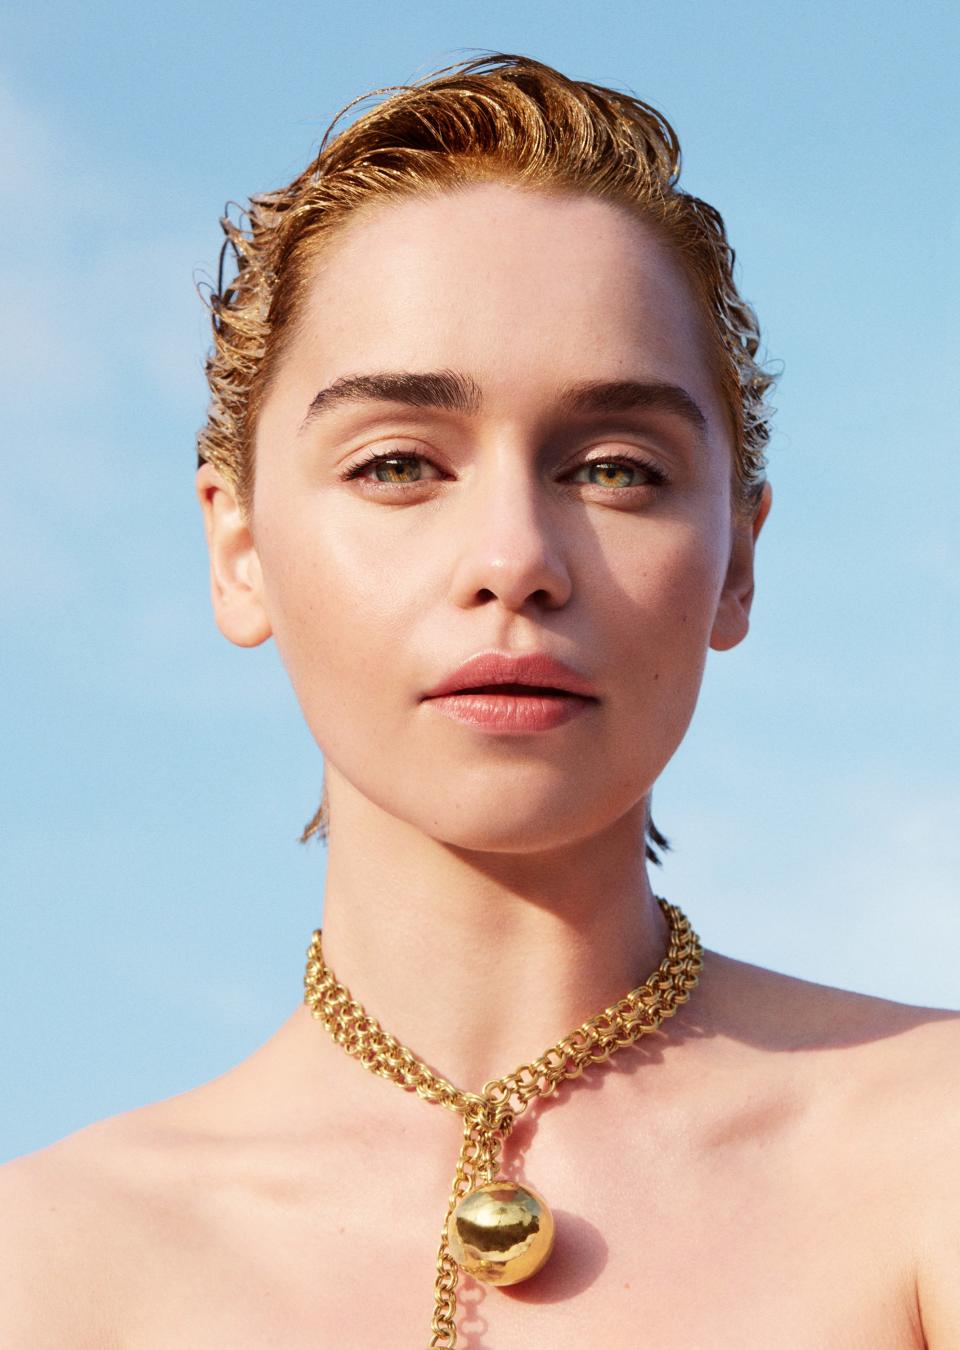 <cite class="credit">Bottega Veneta necklace. Makeup colors: Tinted Moisturizer Illuminating in Bare Radiance, Eye Brow Gel, and Lip Glacé in Cosmic by Laura Mercier.</cite>